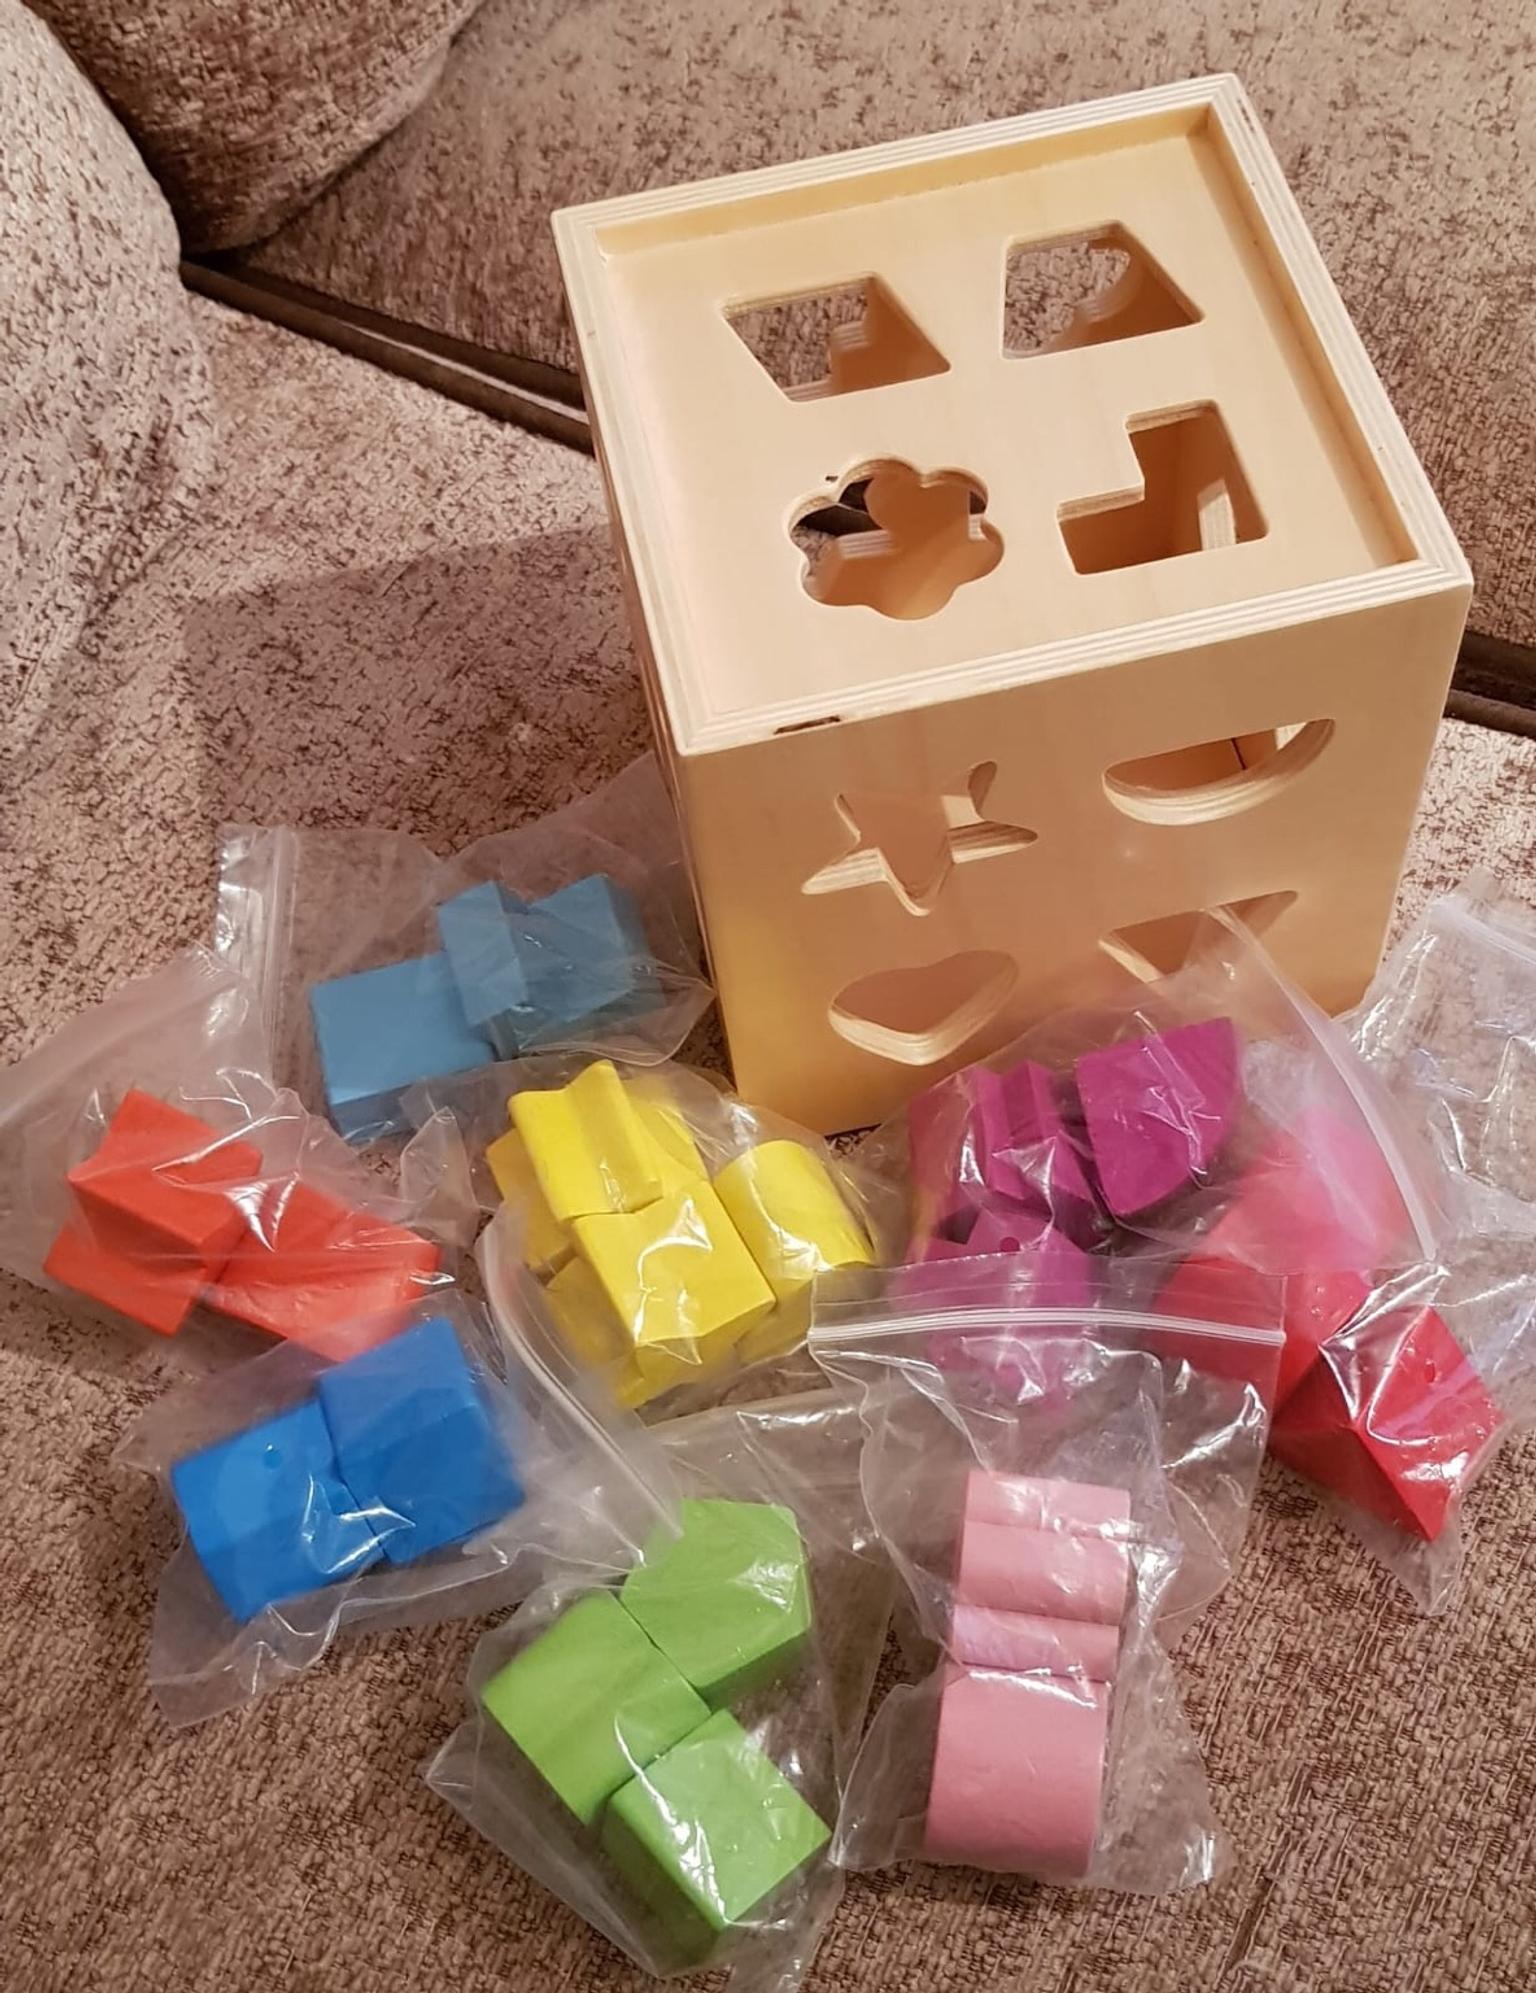 chad valley wooden shape sorter